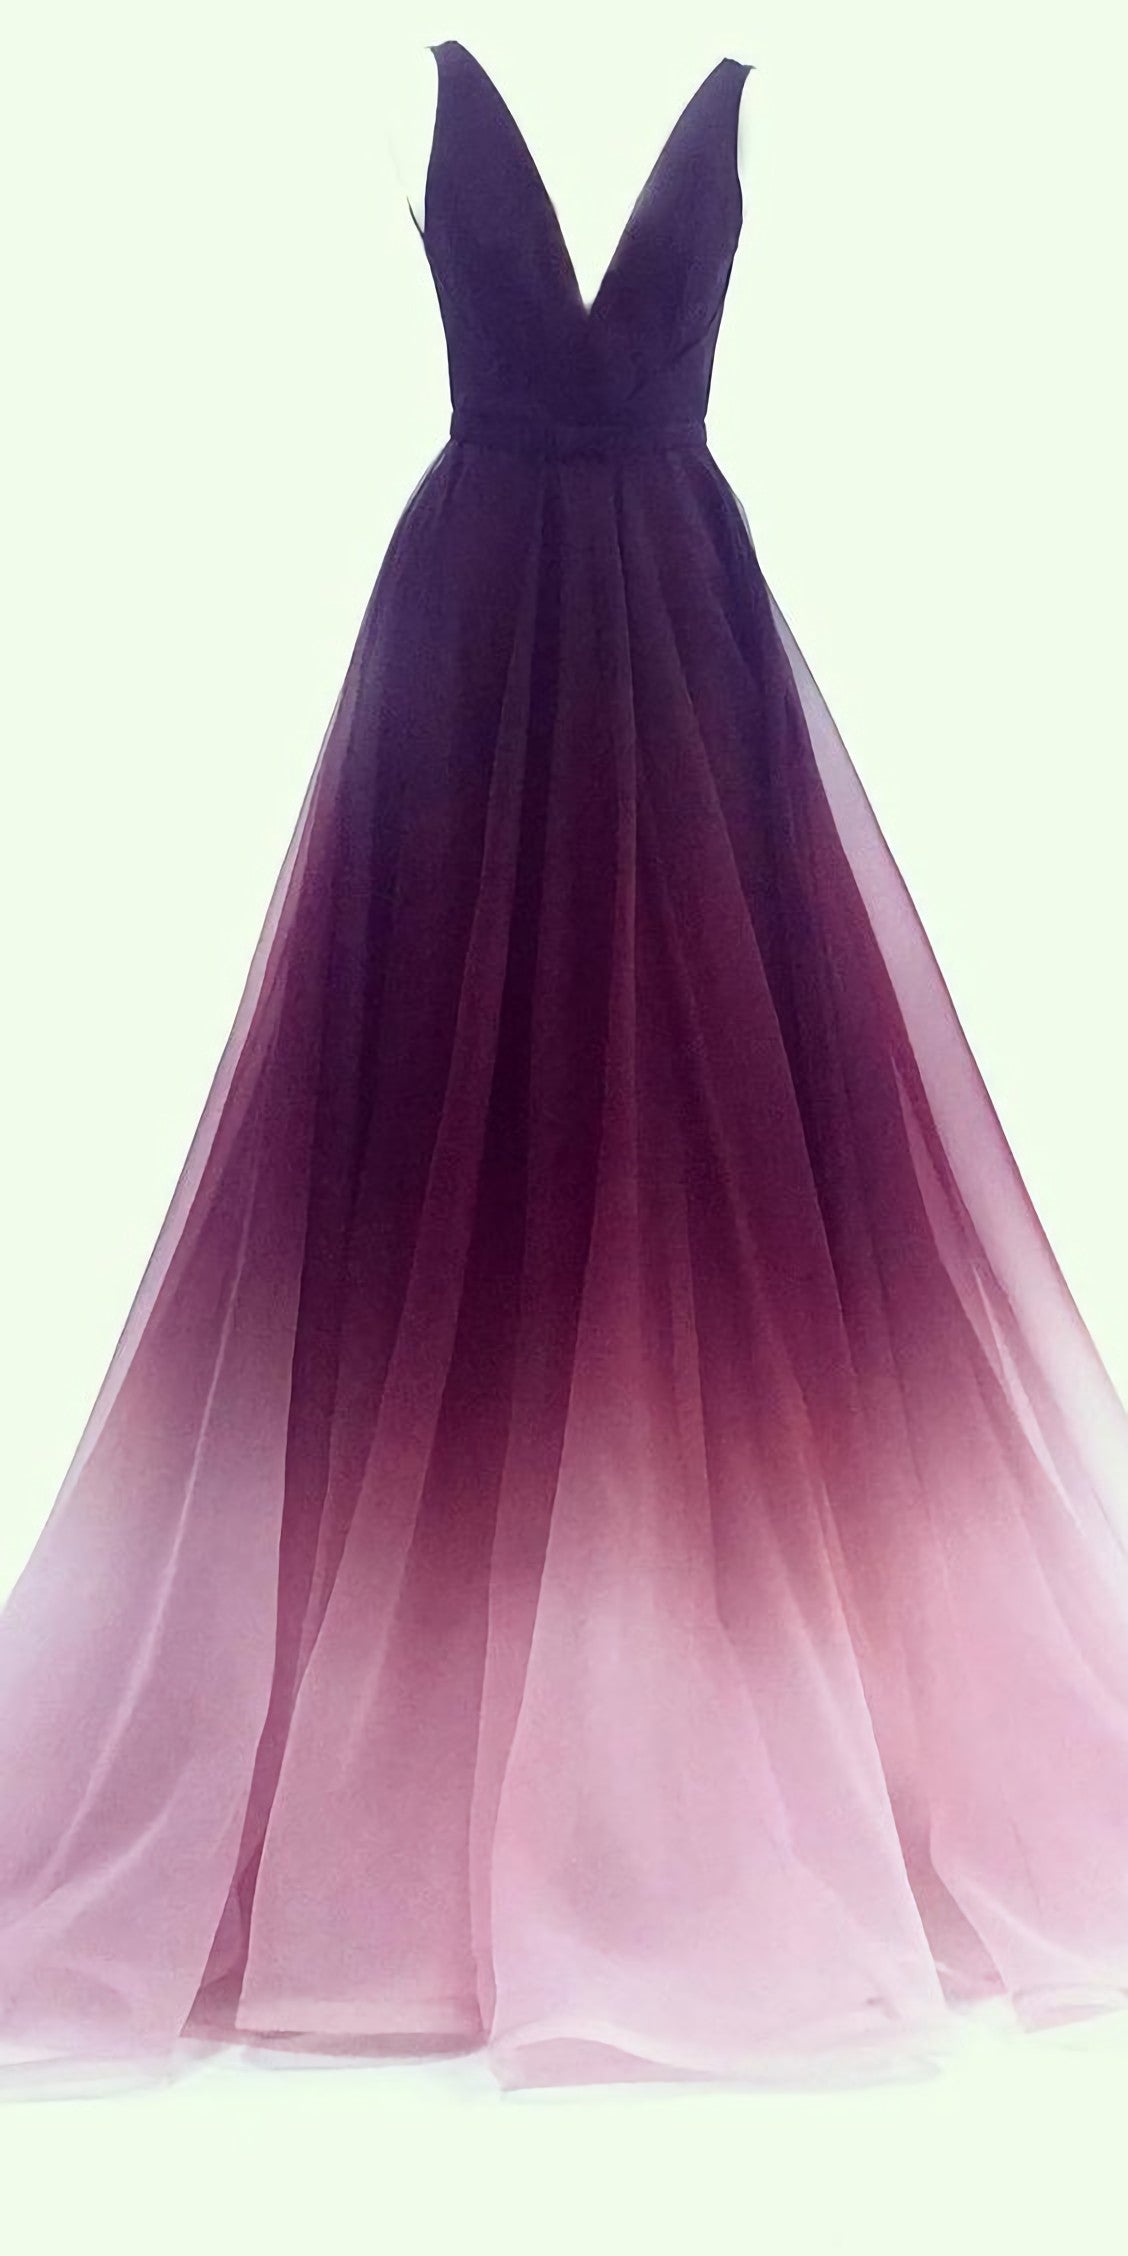 Prom Dress Long Sleeves, A Line V Neck Chiffon Ombre Long Prom Dresses, Simple Formal Gown